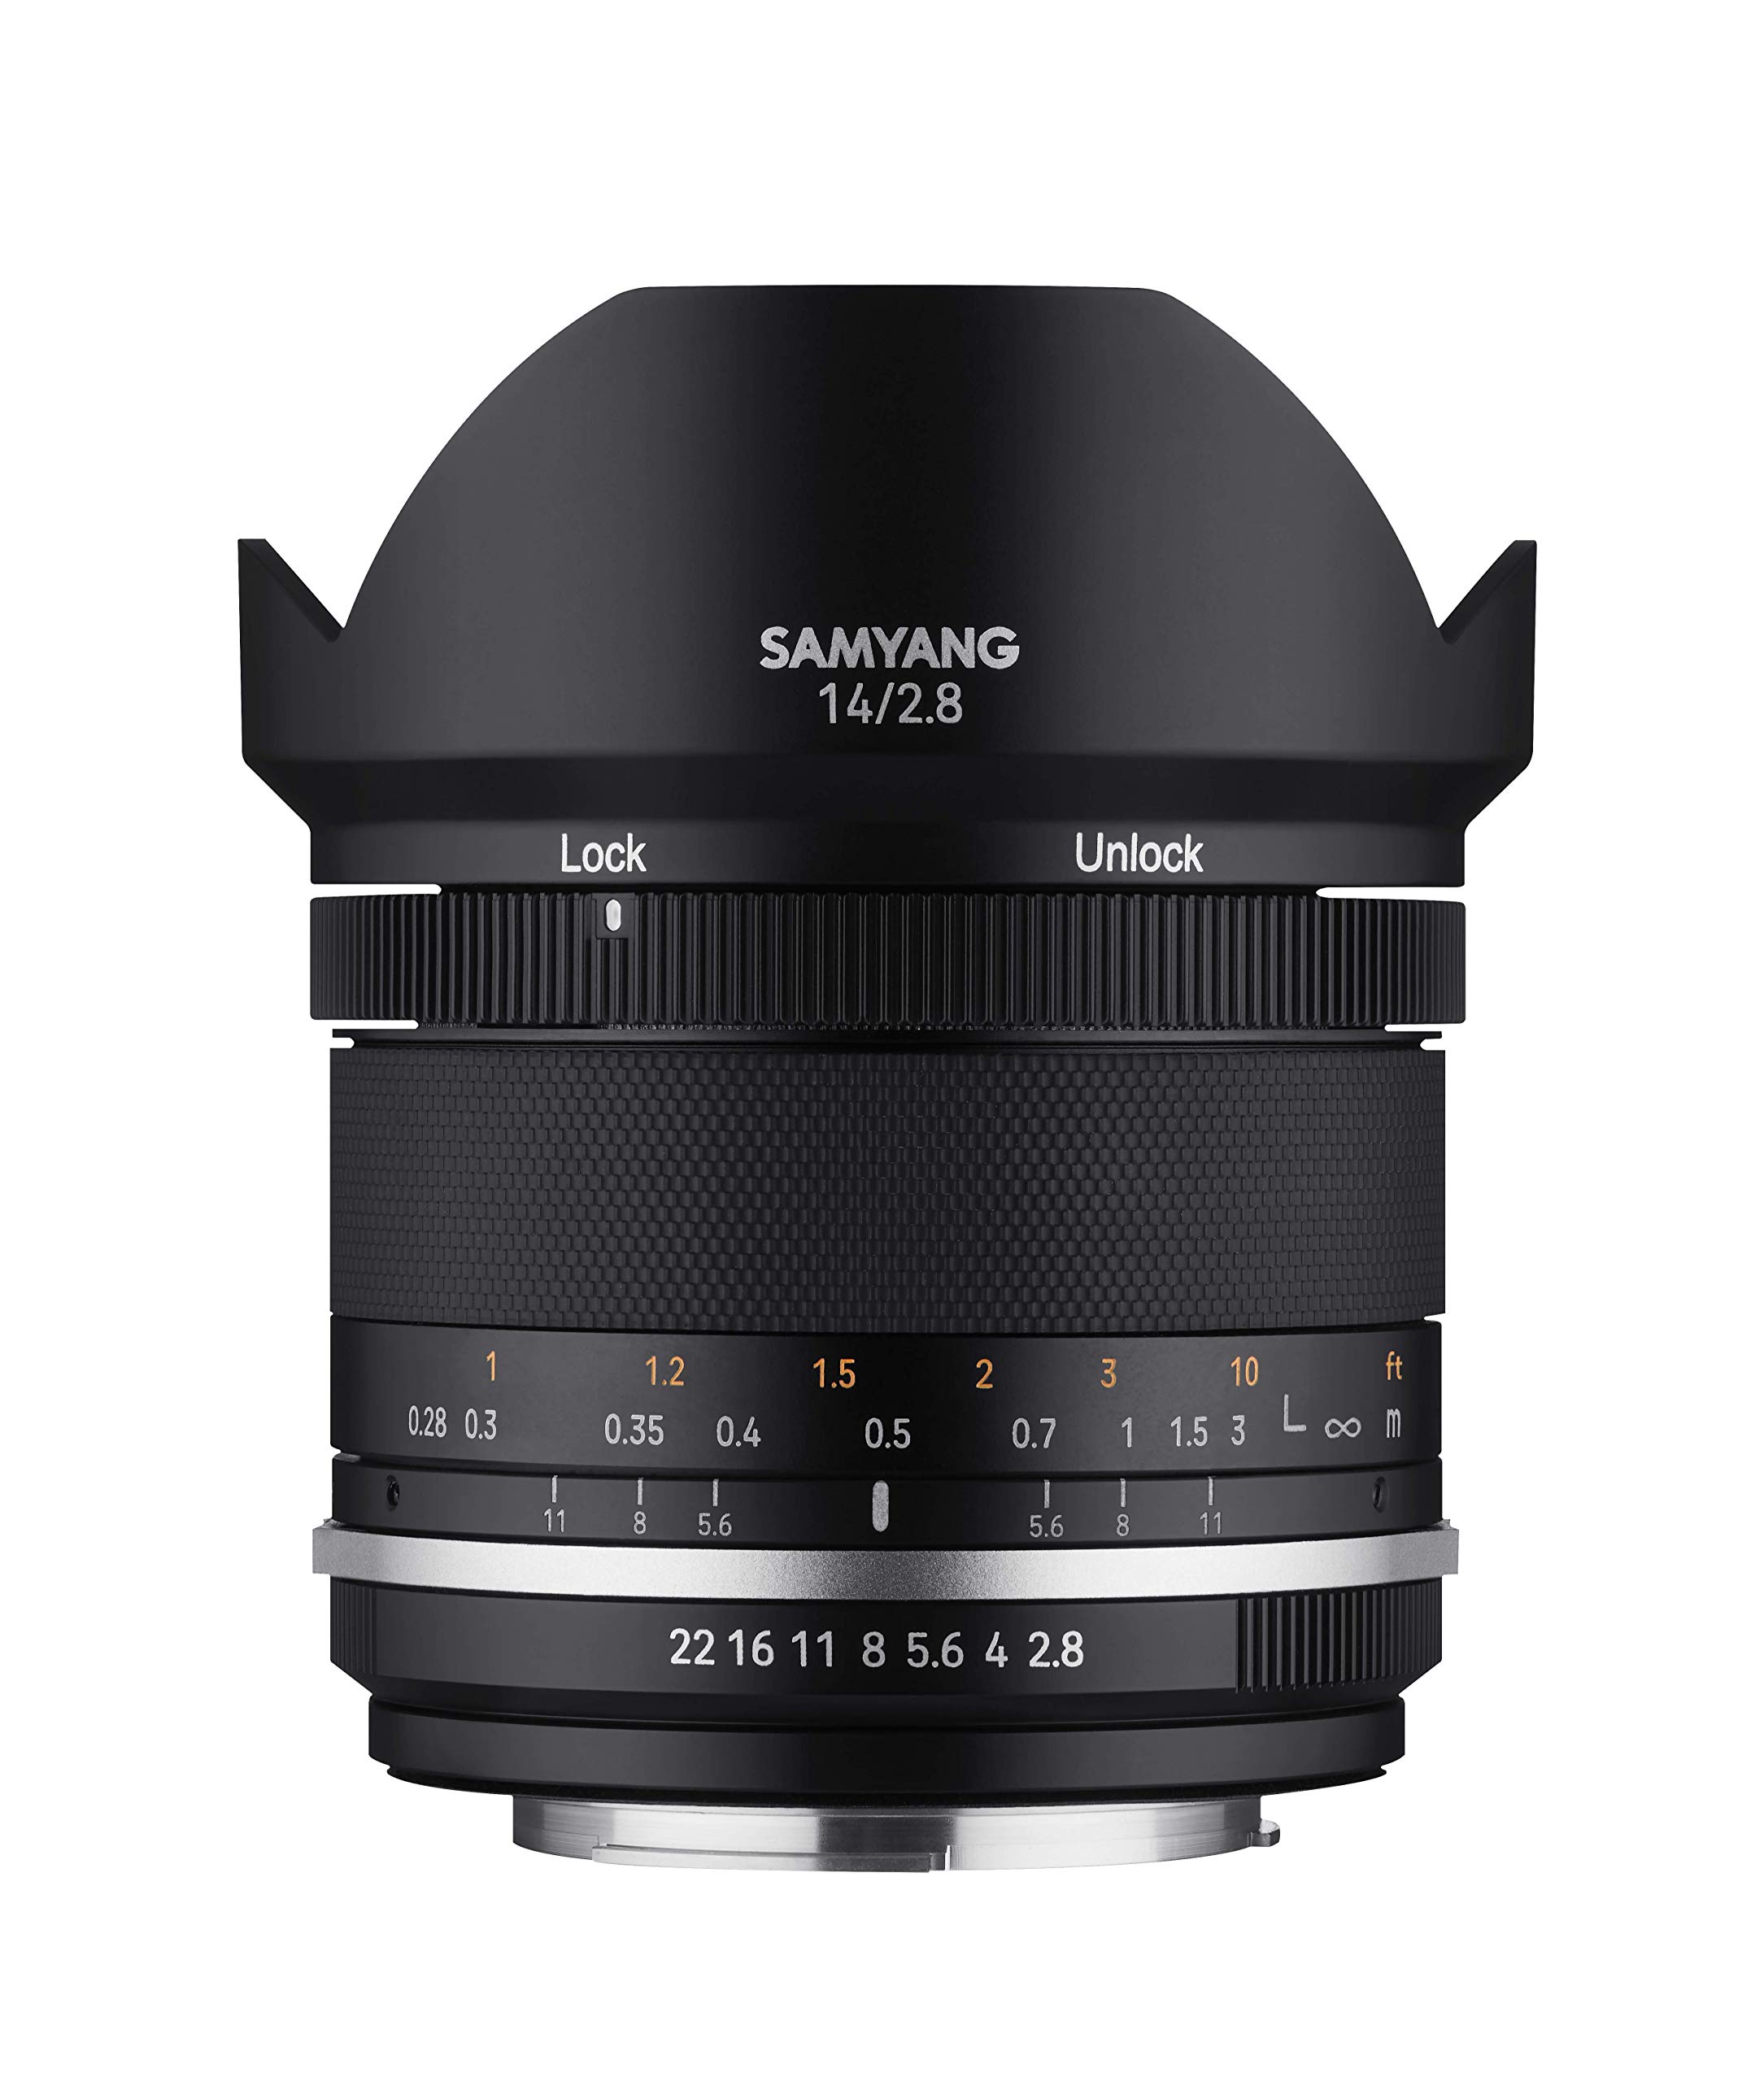 Samyang MK2 14mm F2.8 Weather Sealed Ultra Wide Angle Lens for Nikon with Built-in AE Chip (MK14AE-N)